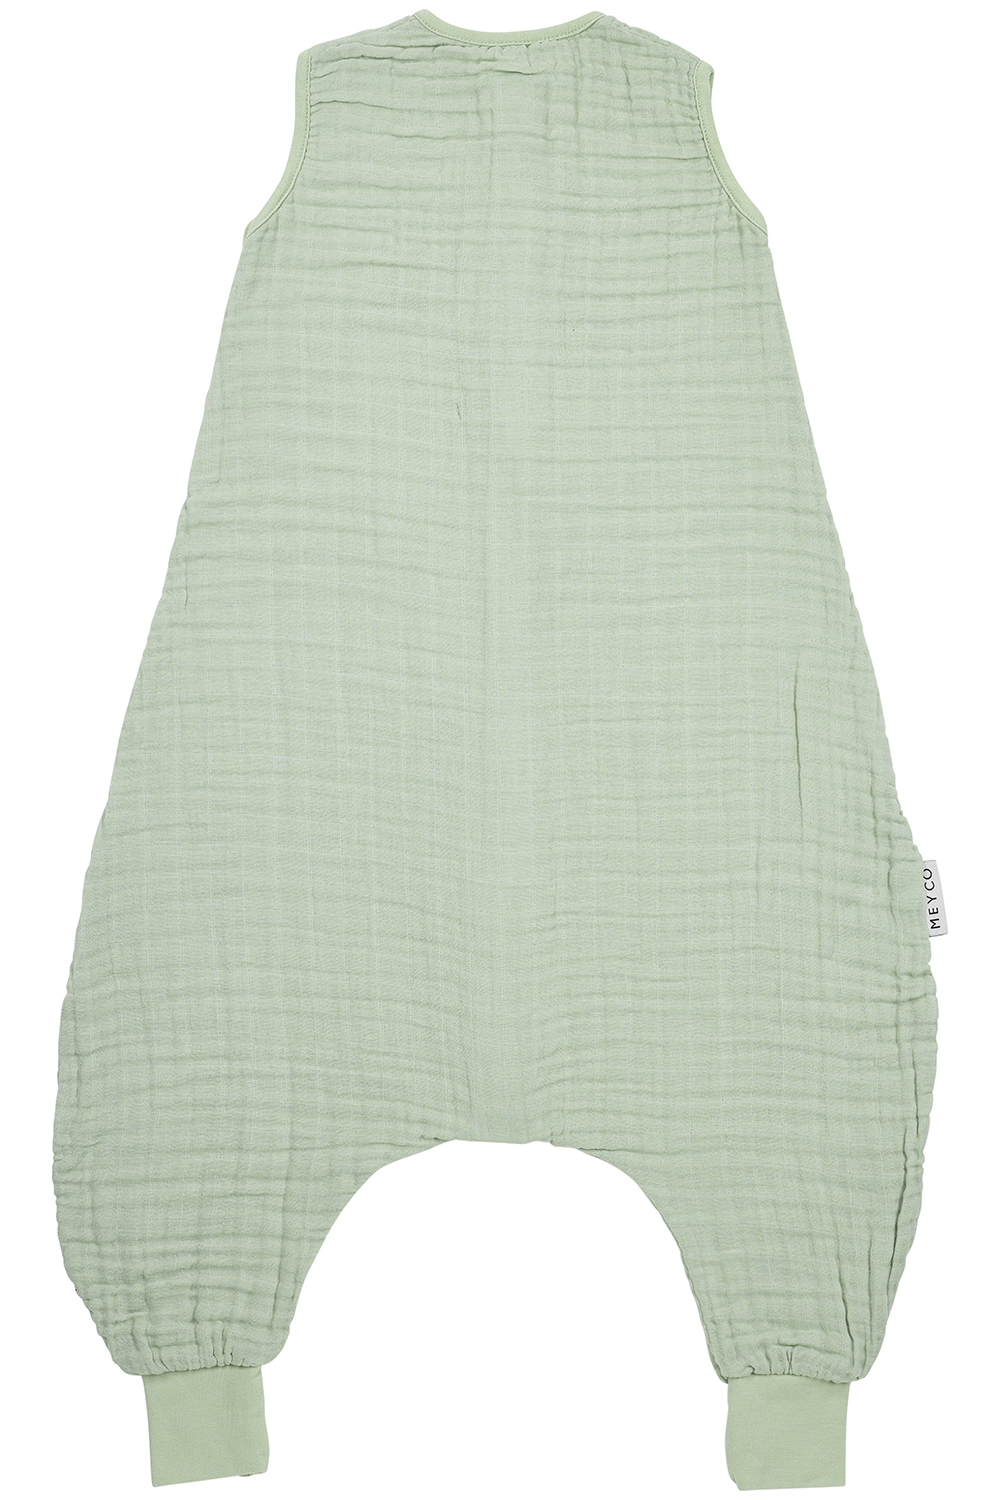 Baby sommer Schlafoverall Jumper pre-washed musselin Uni - soft green - 104cm